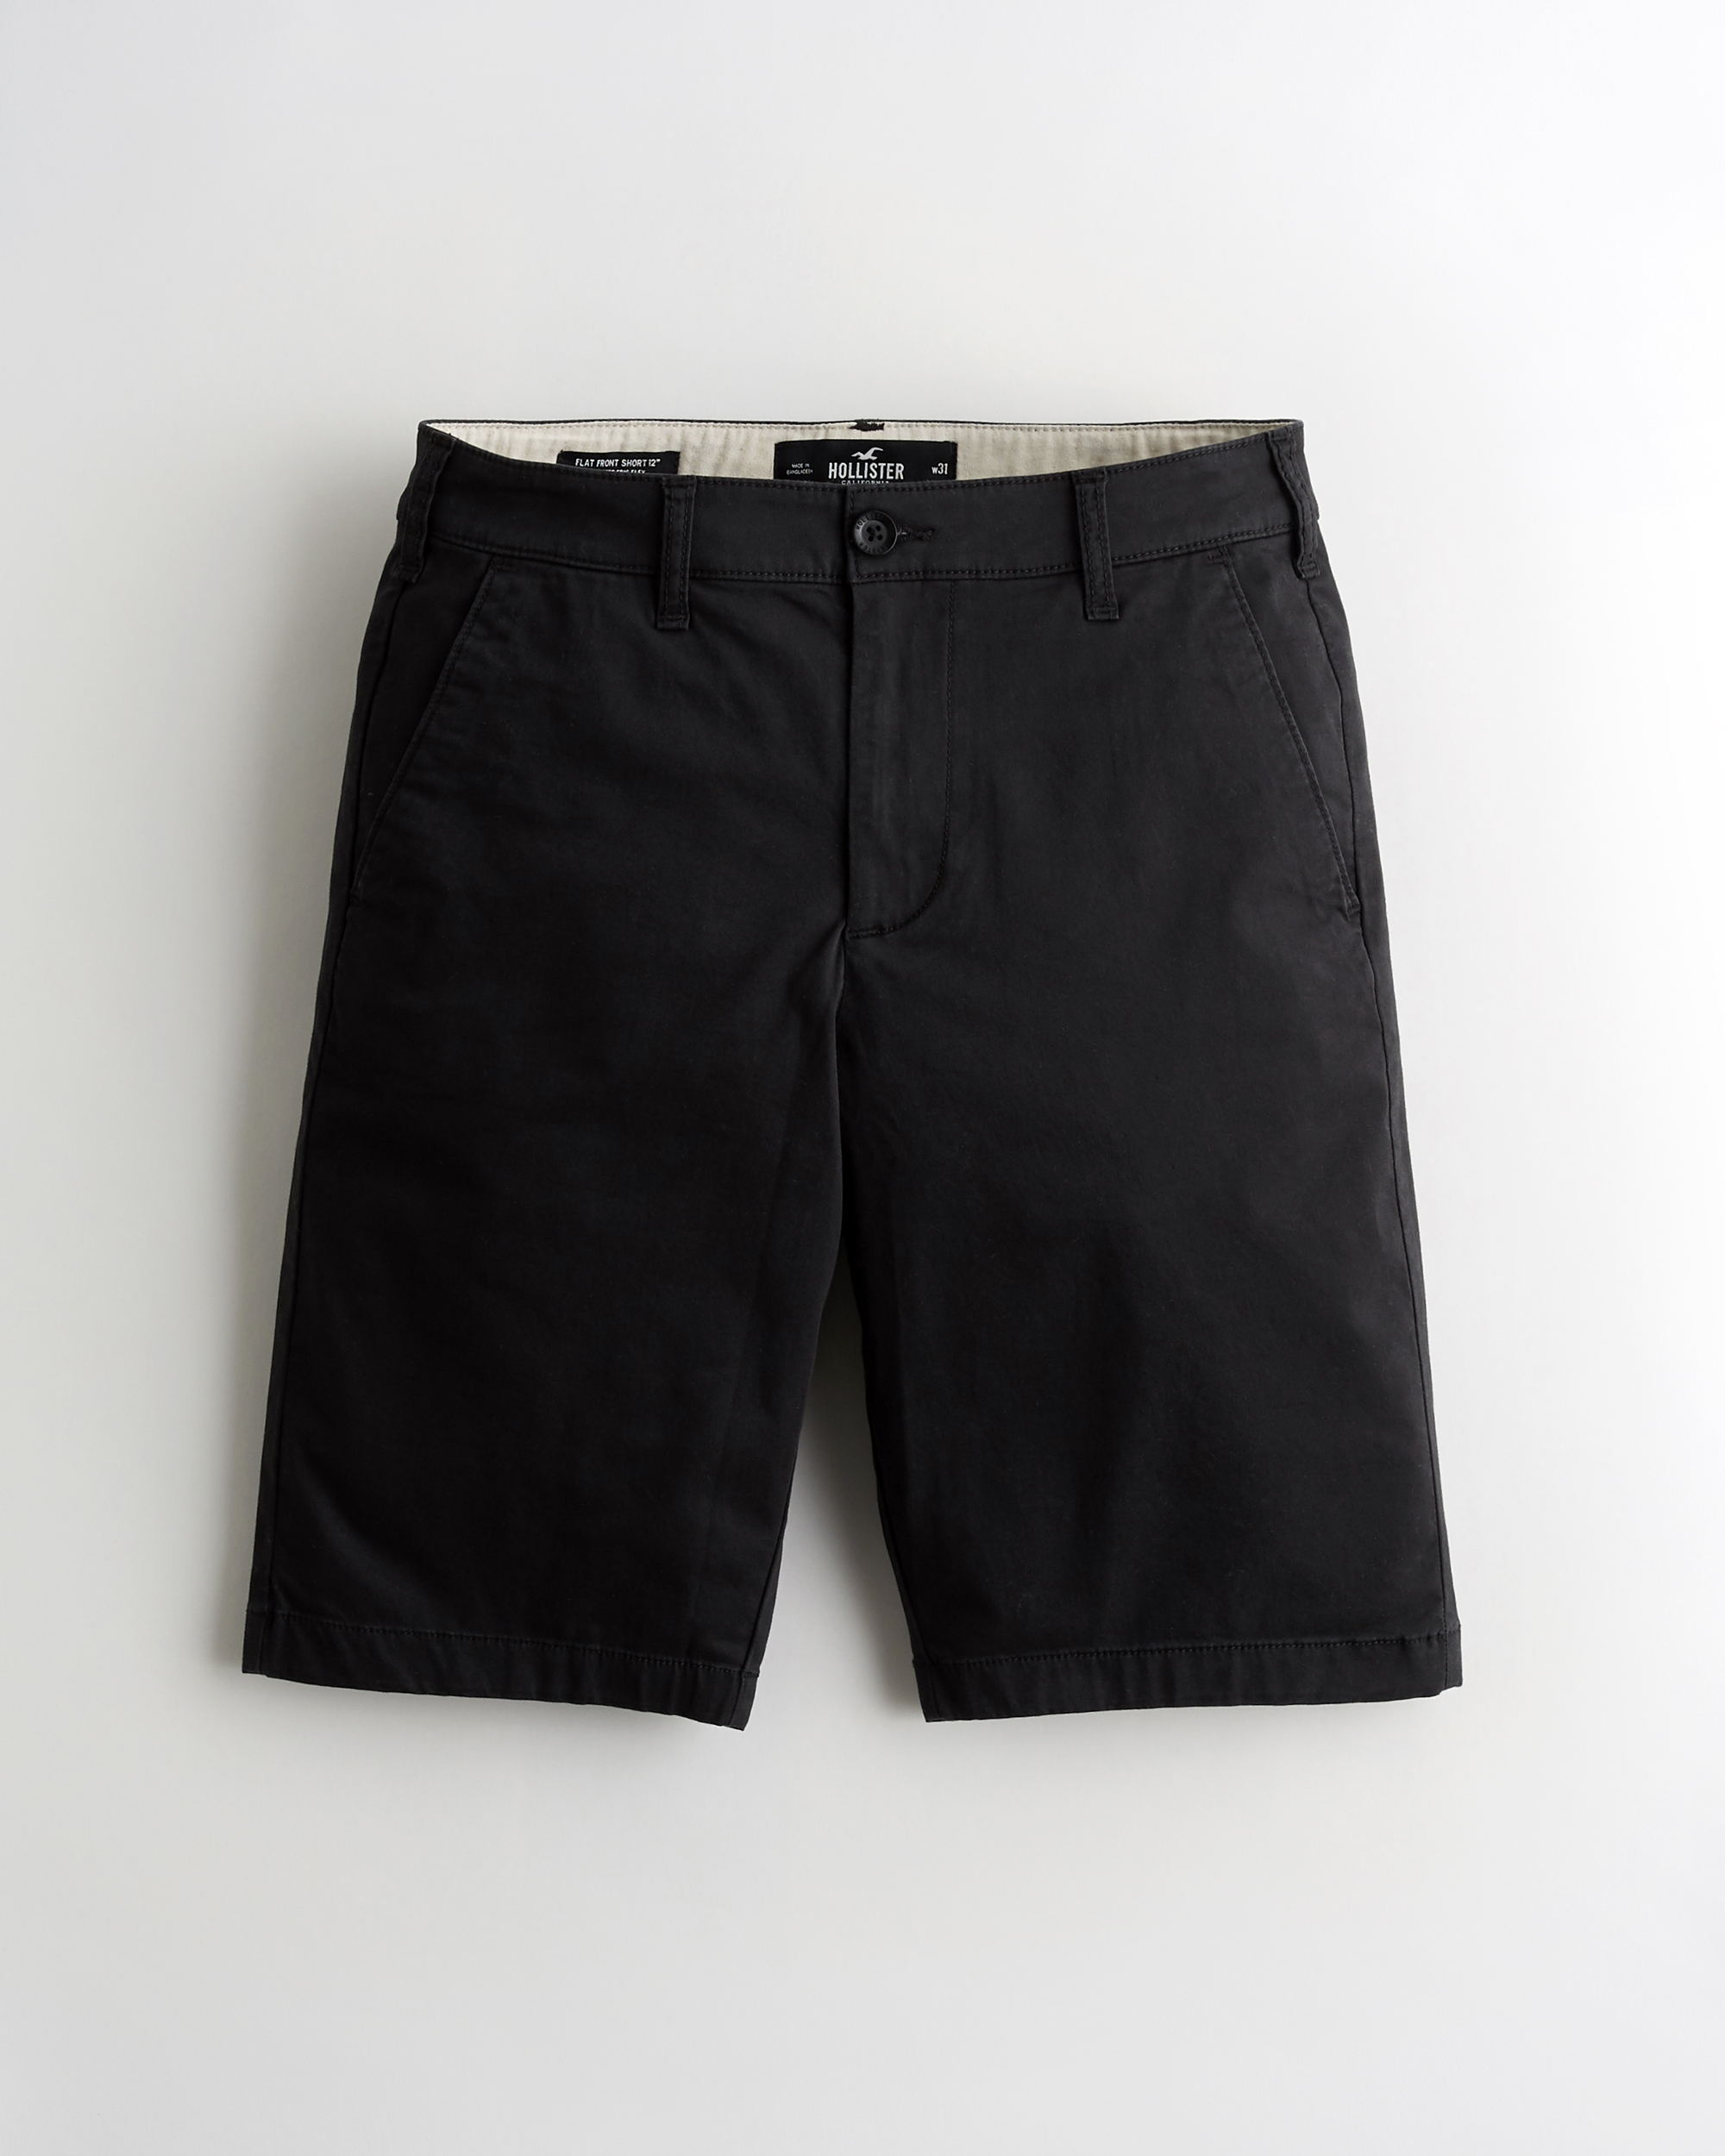 Shorts for Guys | Hollister Co.